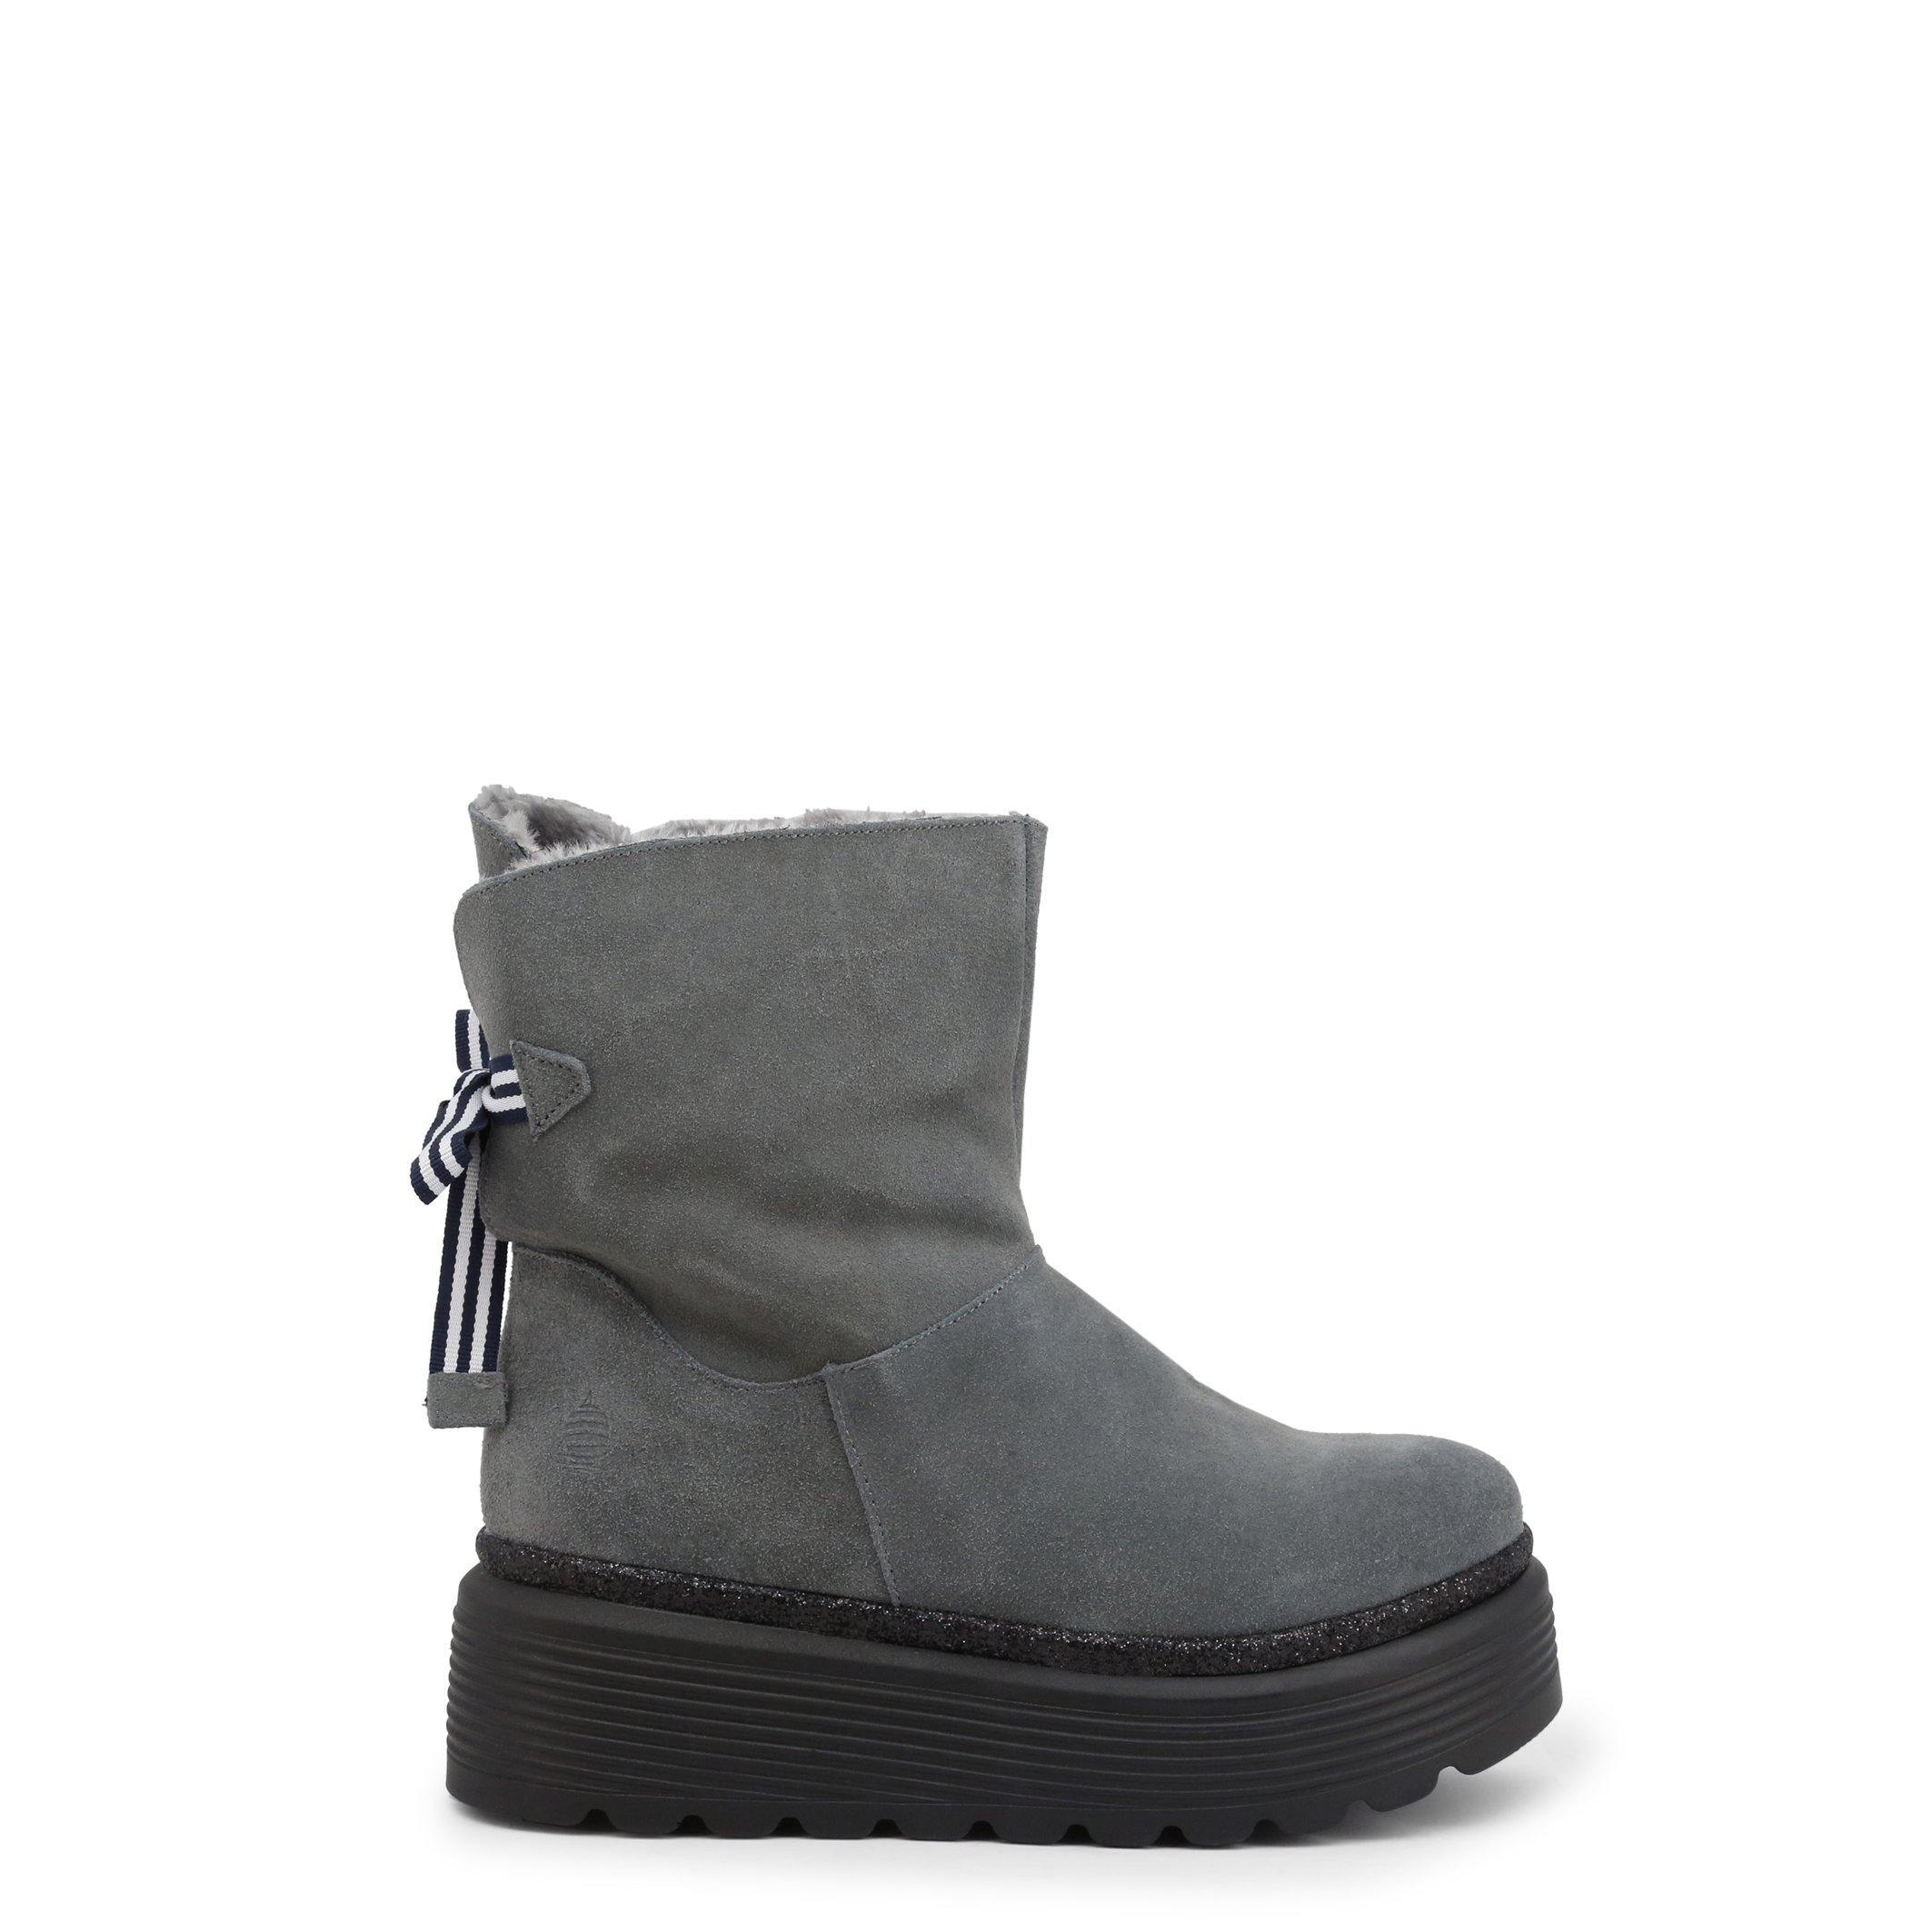 Marina Yachting – Ladies Leather Ankle Boots In Black Or Grey – Space172W653300 – Grey – EU 41 – JC Brandz